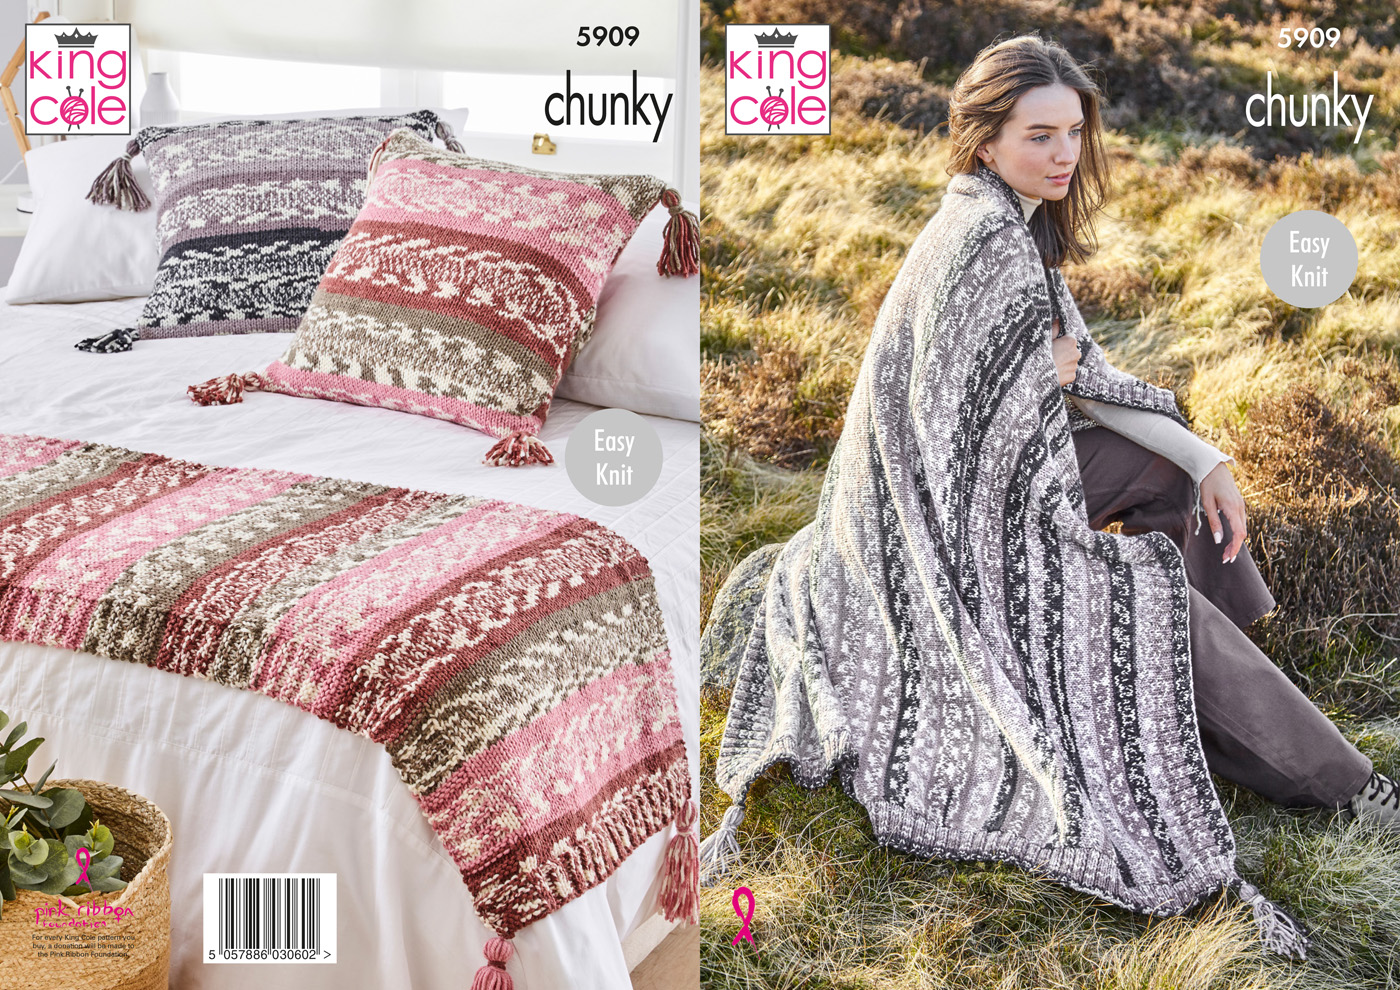 Blanket, Bed Runner & Cushion Cover: Knitted in King Cole Nordic Chunky 5909